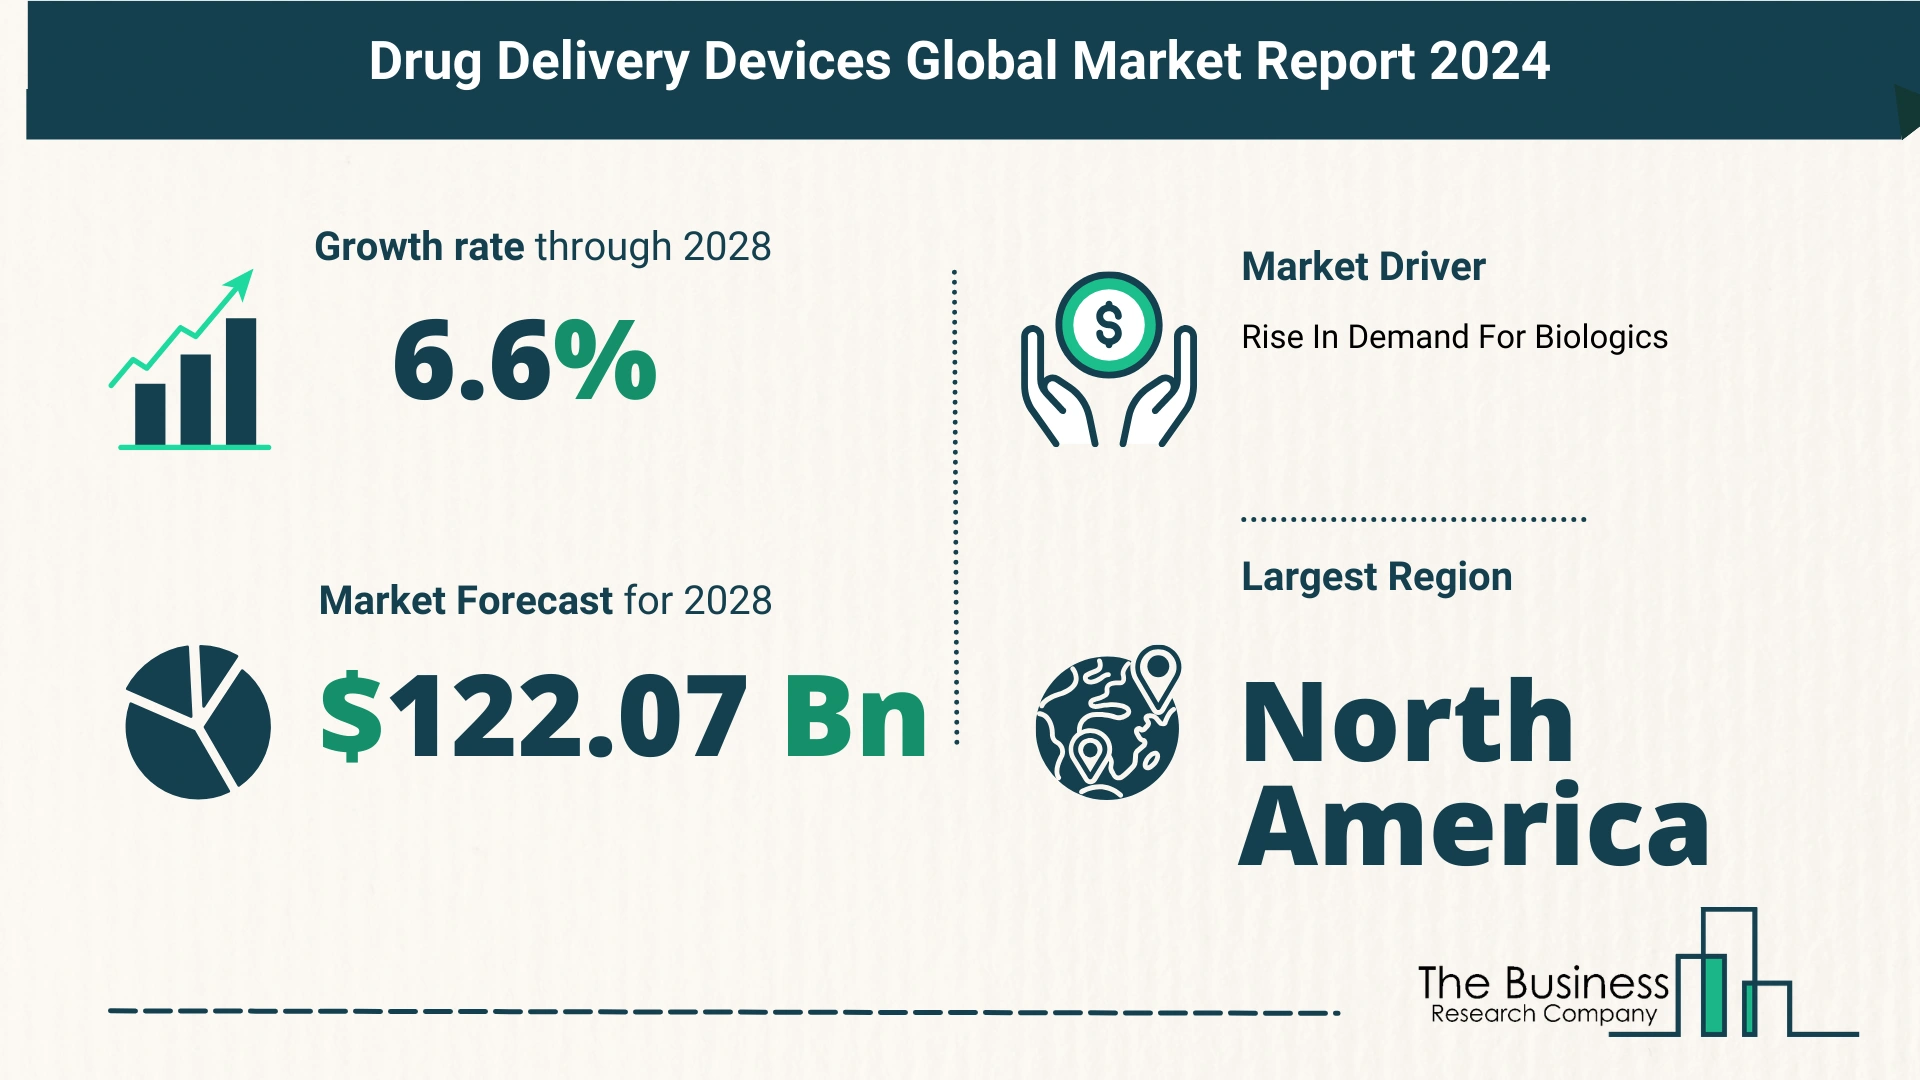 Global Drug Delivery Devices Market Report 2024 – Top Market Trends And Opportunities